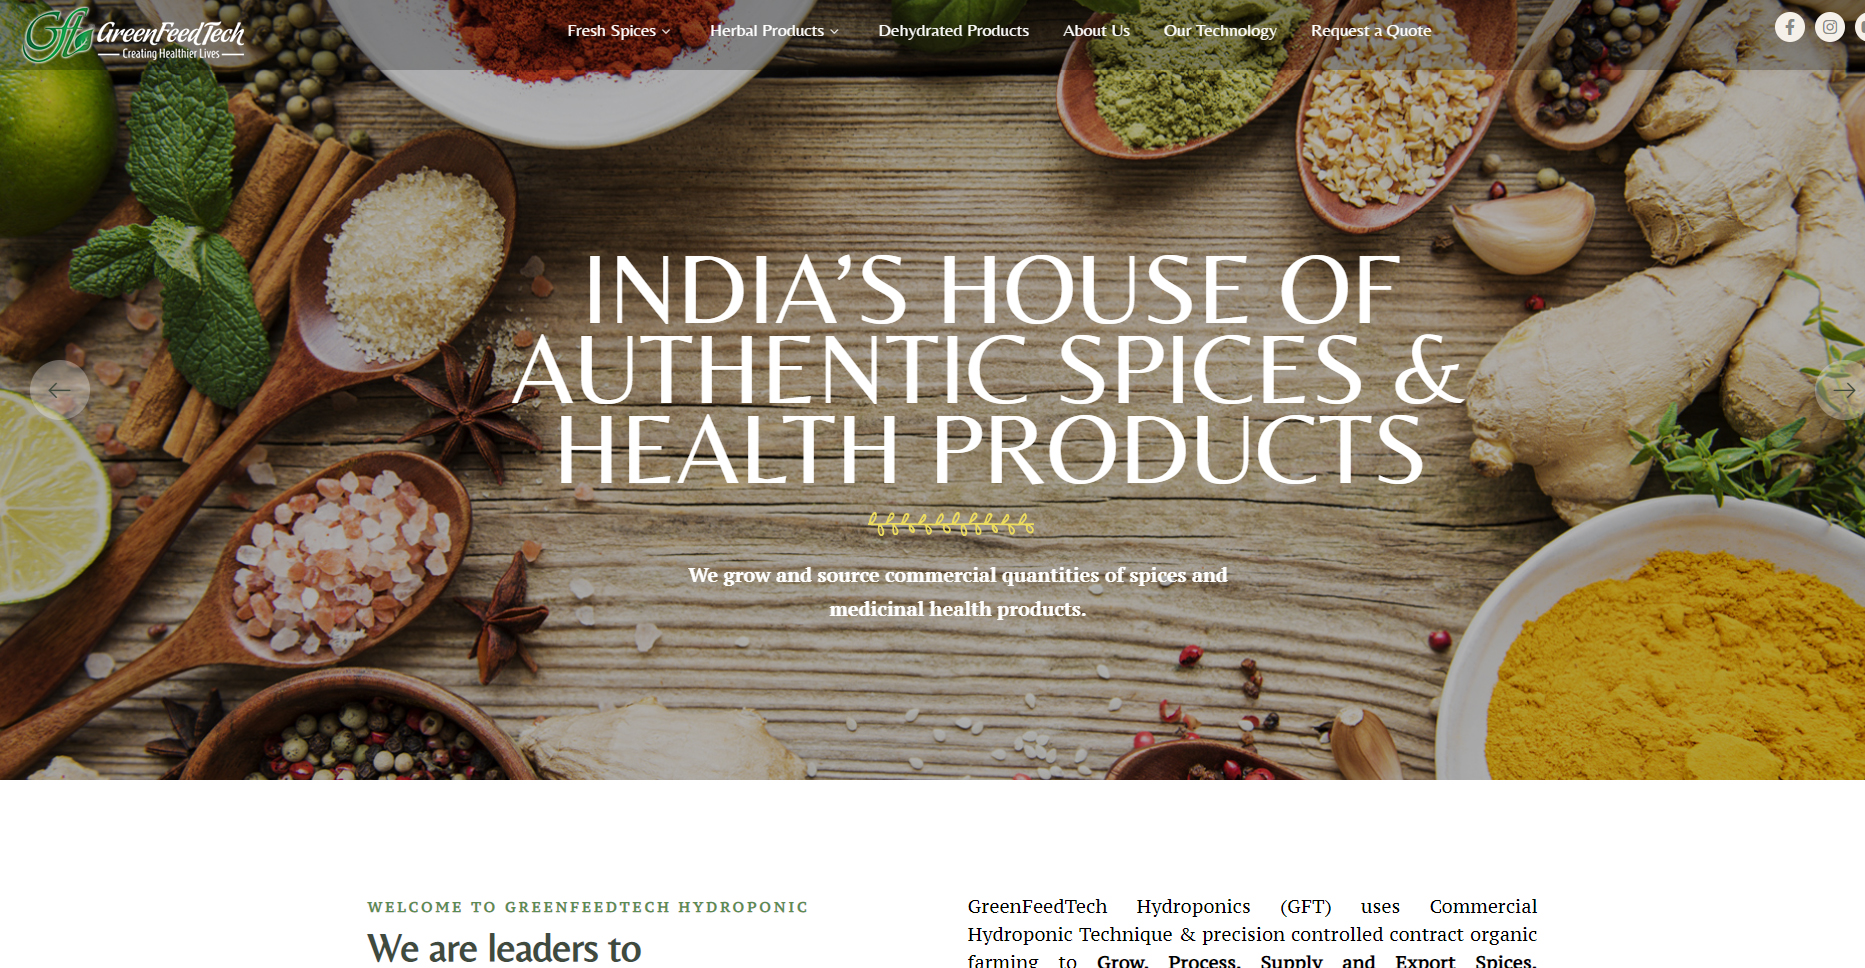 Grow, Process, Supply, Export Spices